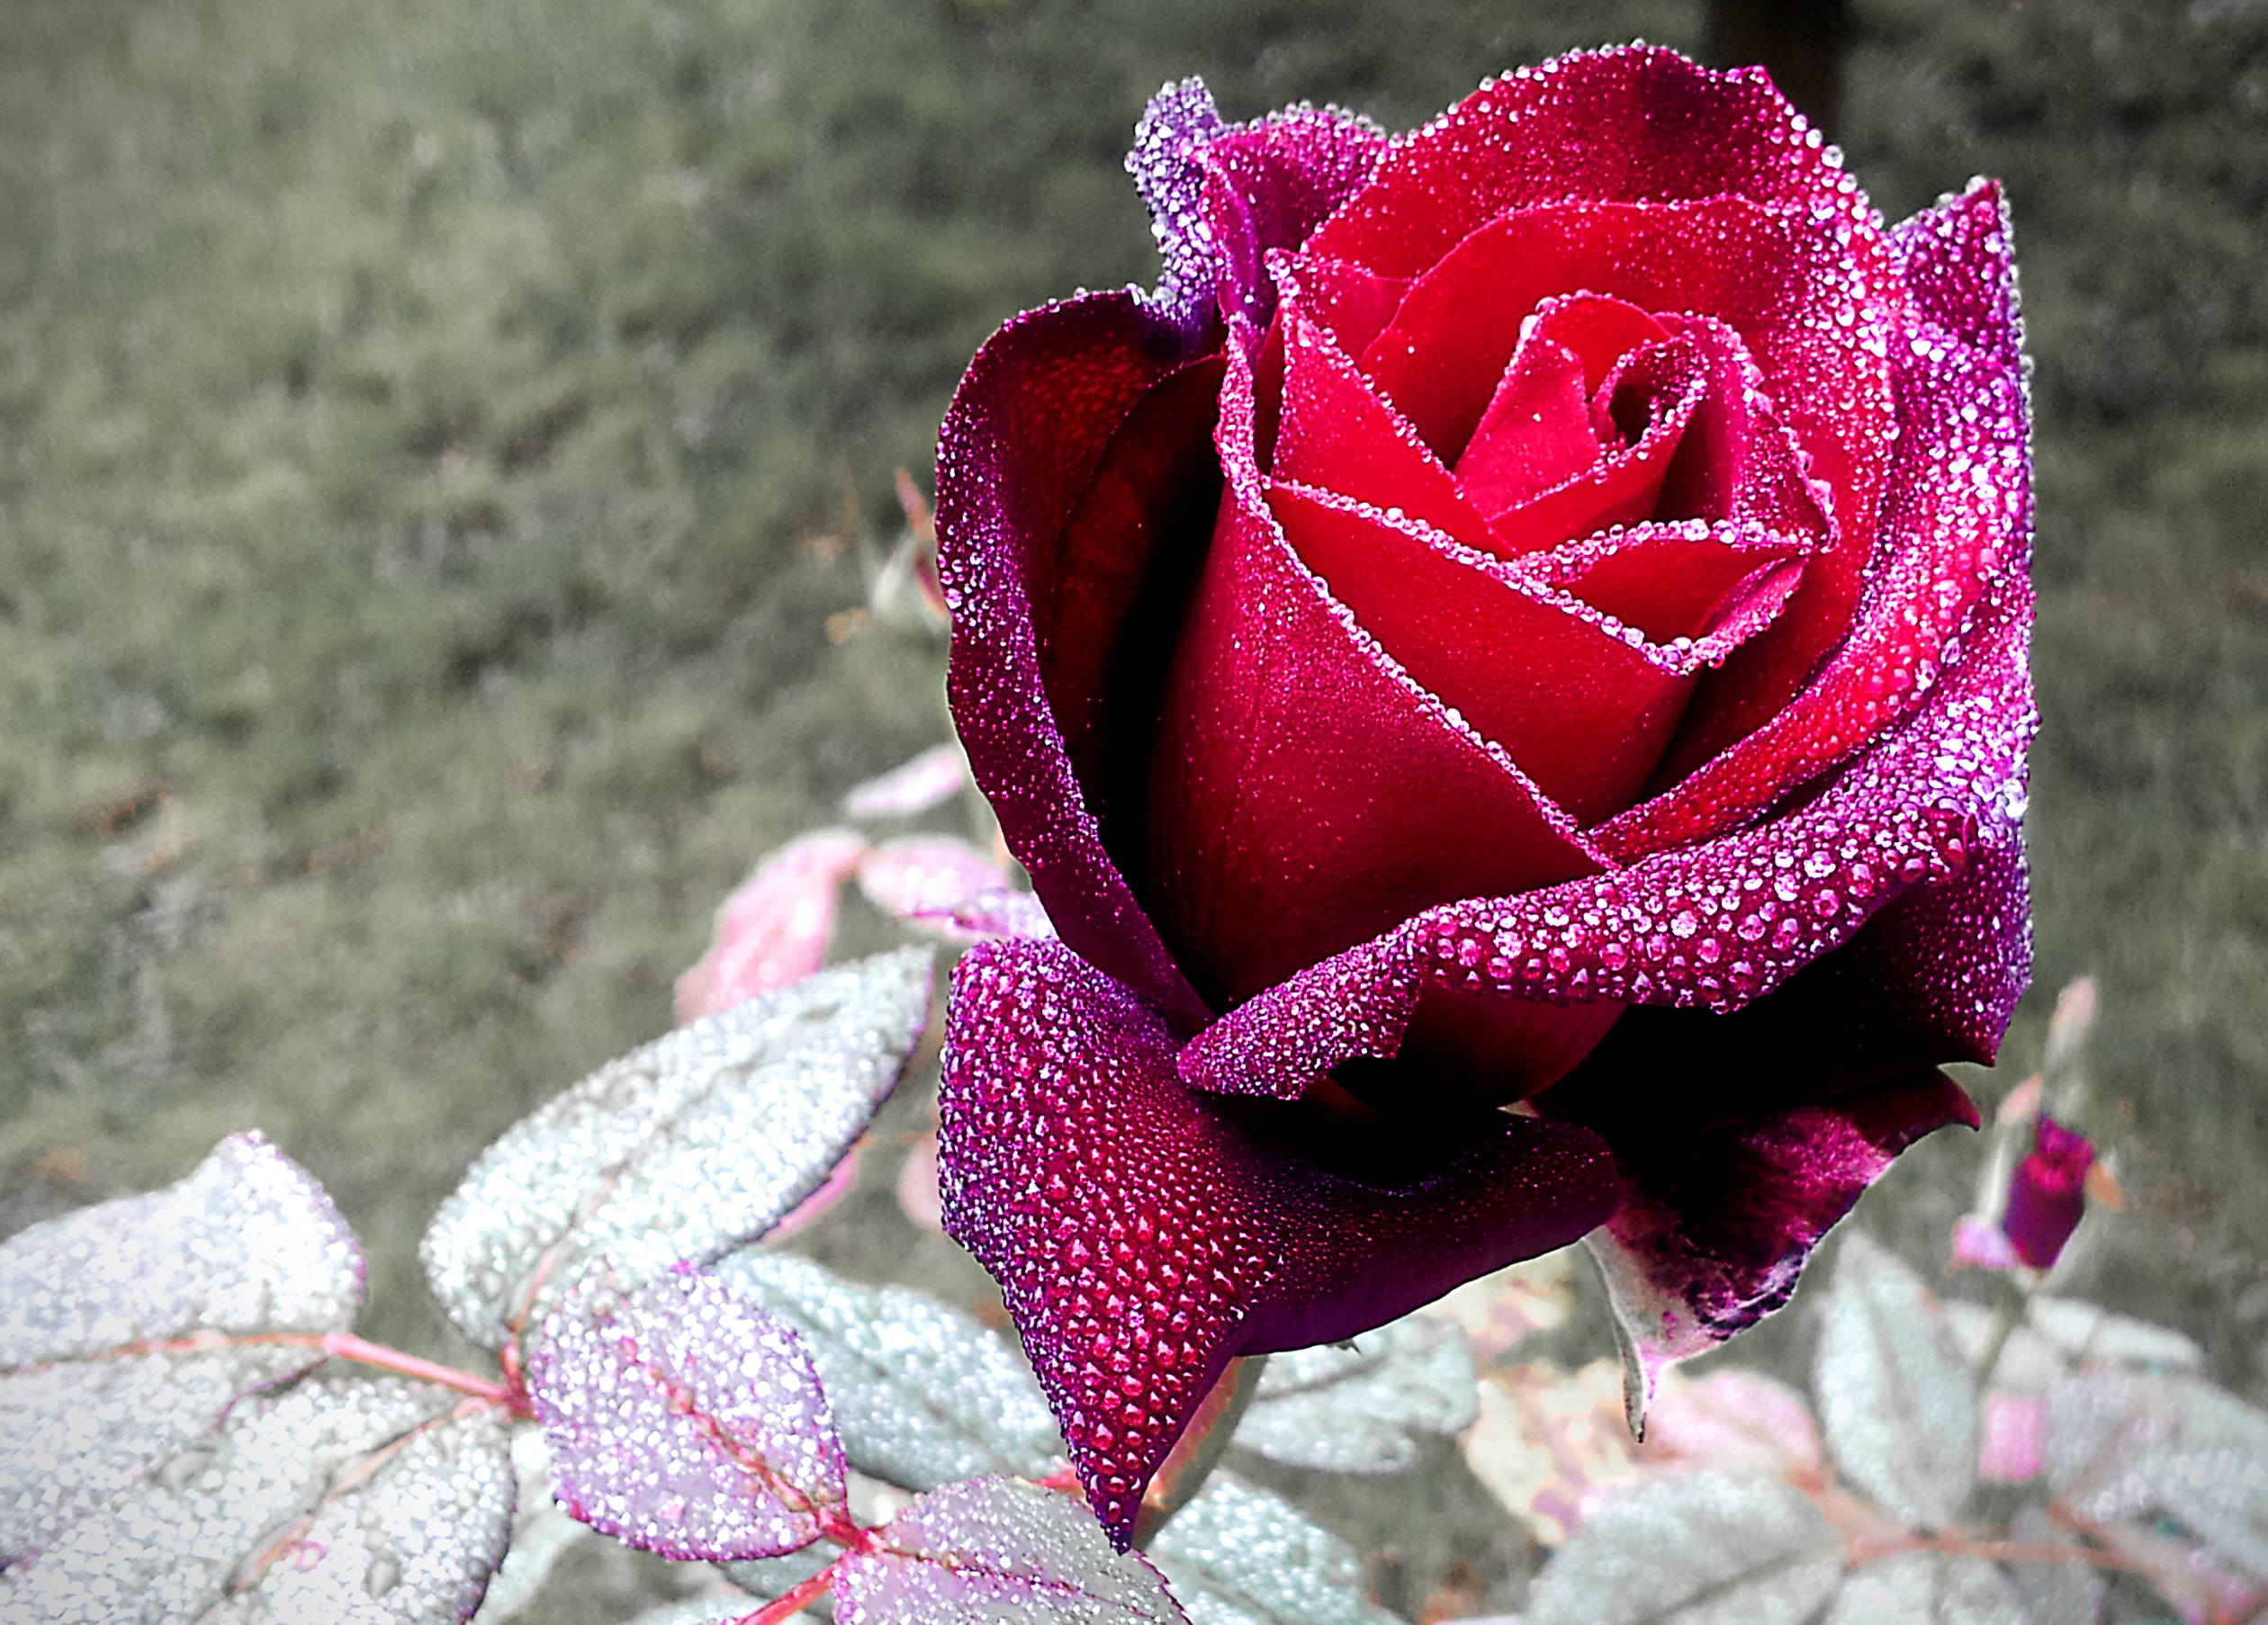 Red rose with dew drops photo